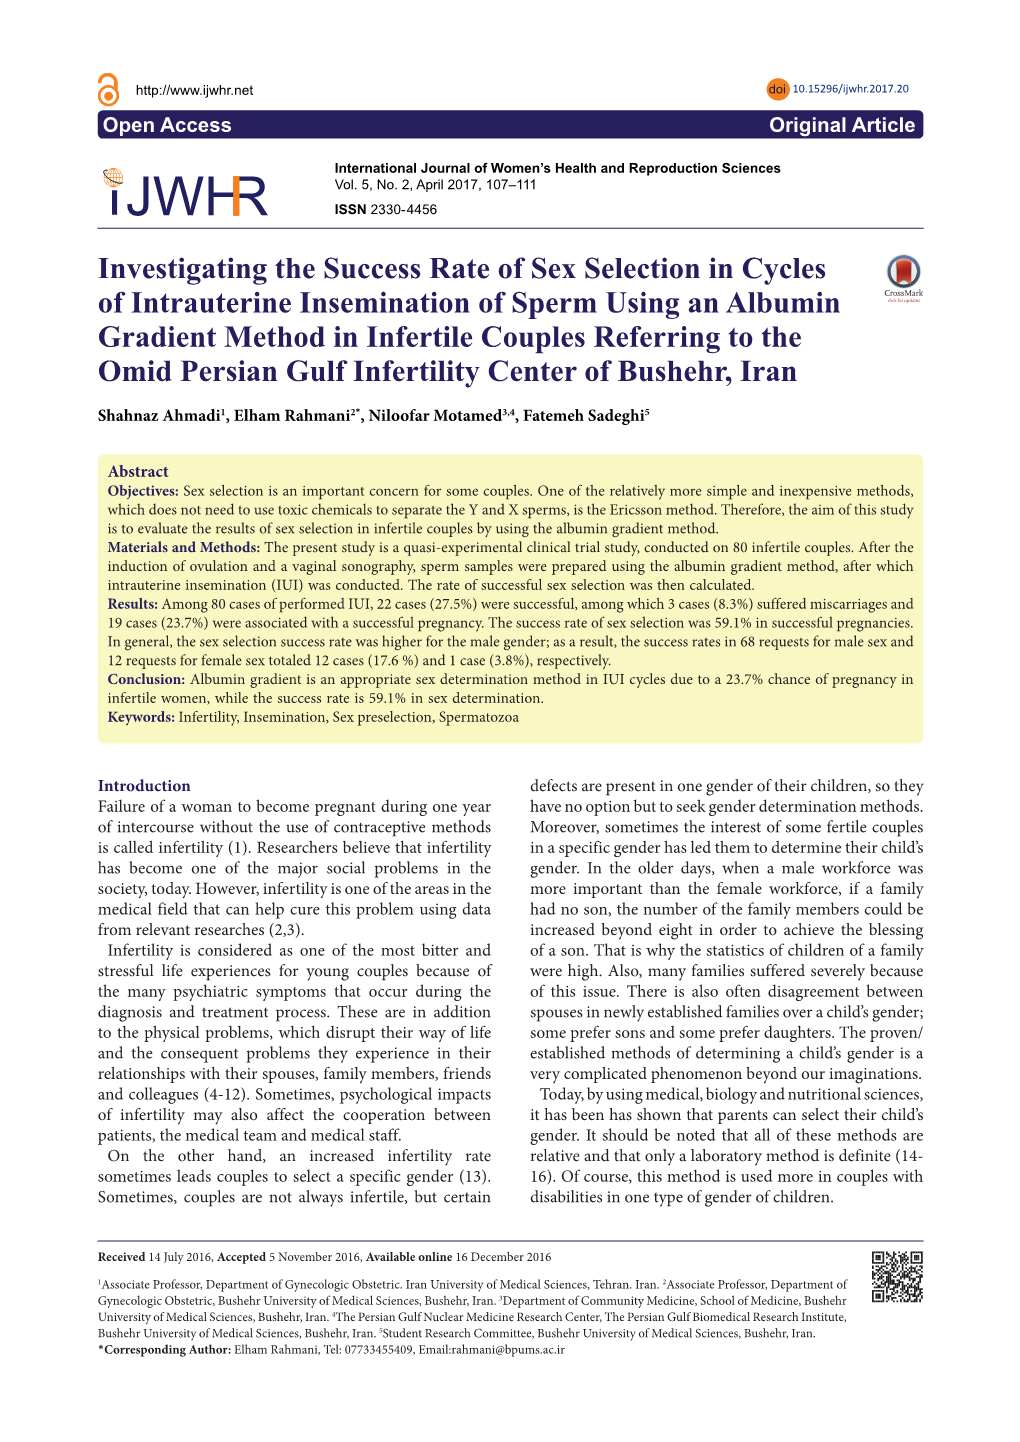 Investigating the Success Rate of Sex Selection in Cycles of Intrauterine